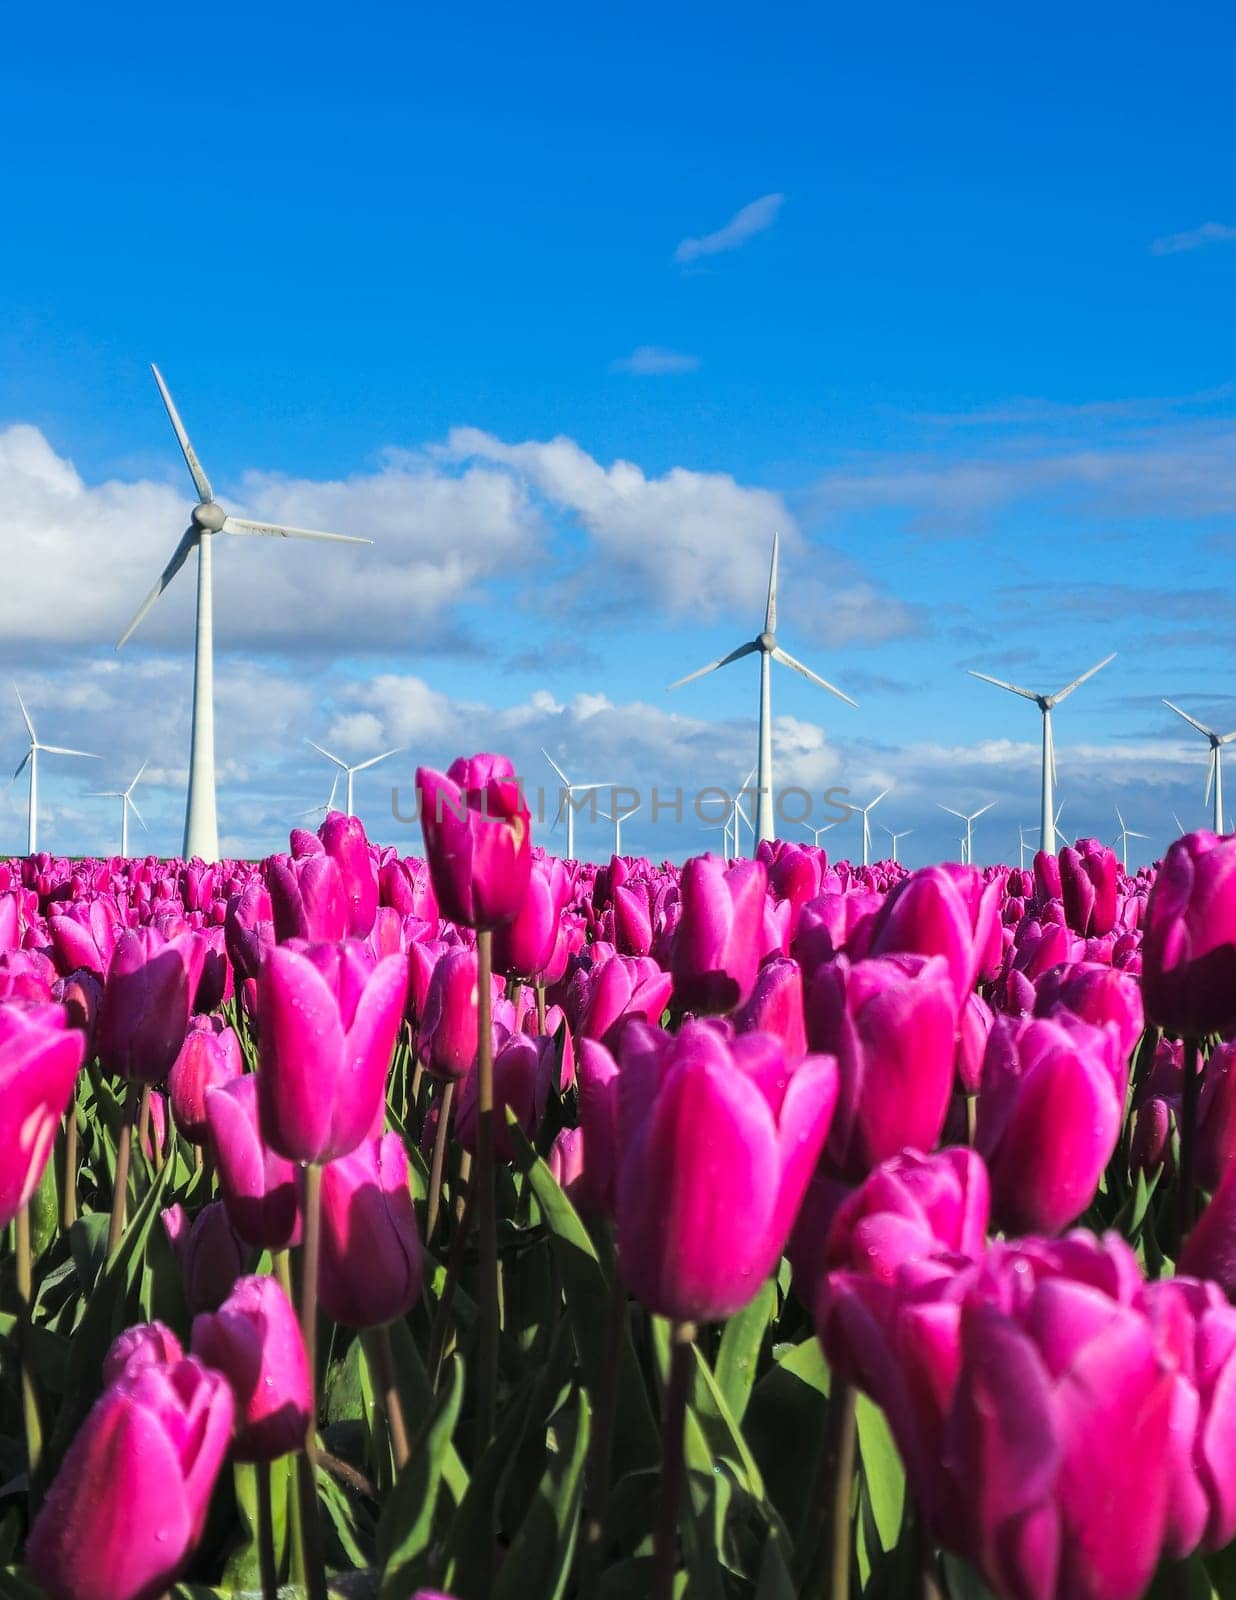 A vibrant field of purple tulips sways gracefully in the wind, with several iconic windmill turbines towering in the background by fokkebok